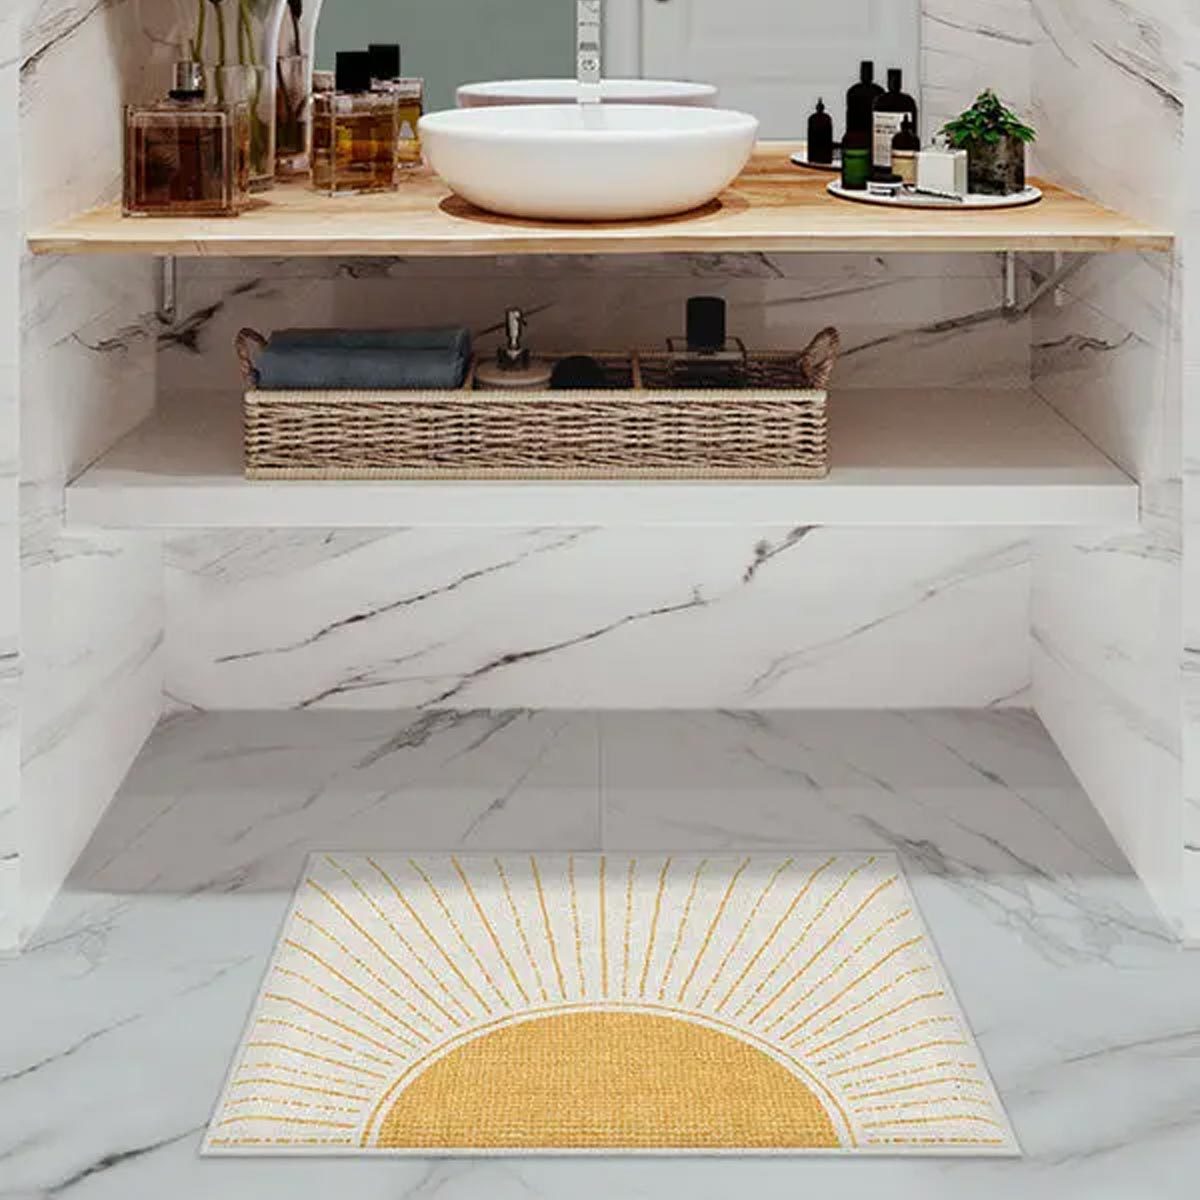 The Ruggable Bath Mat Collection Is Here